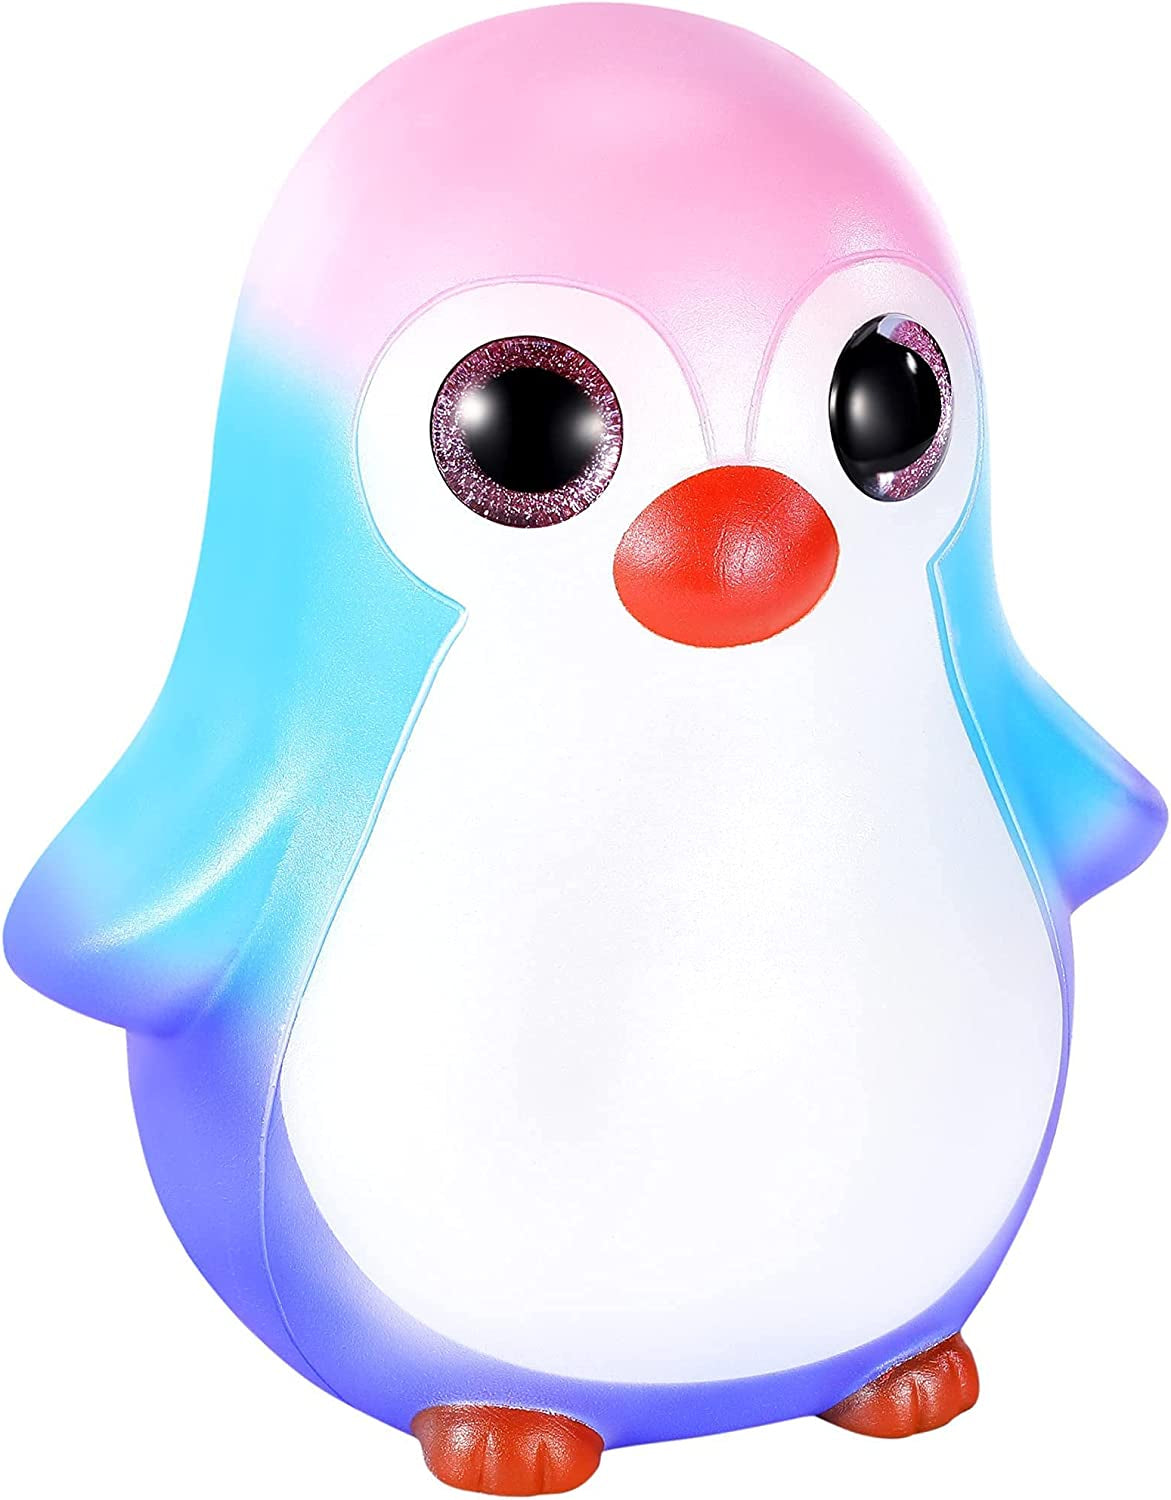 Jumbo Squishy Toys, Giant Animals Squishy Slow Rising Squeeze Toy, Fidget Toys, Stress Reliever, Adorable Decor for Home Office(Pink Head Penguin)